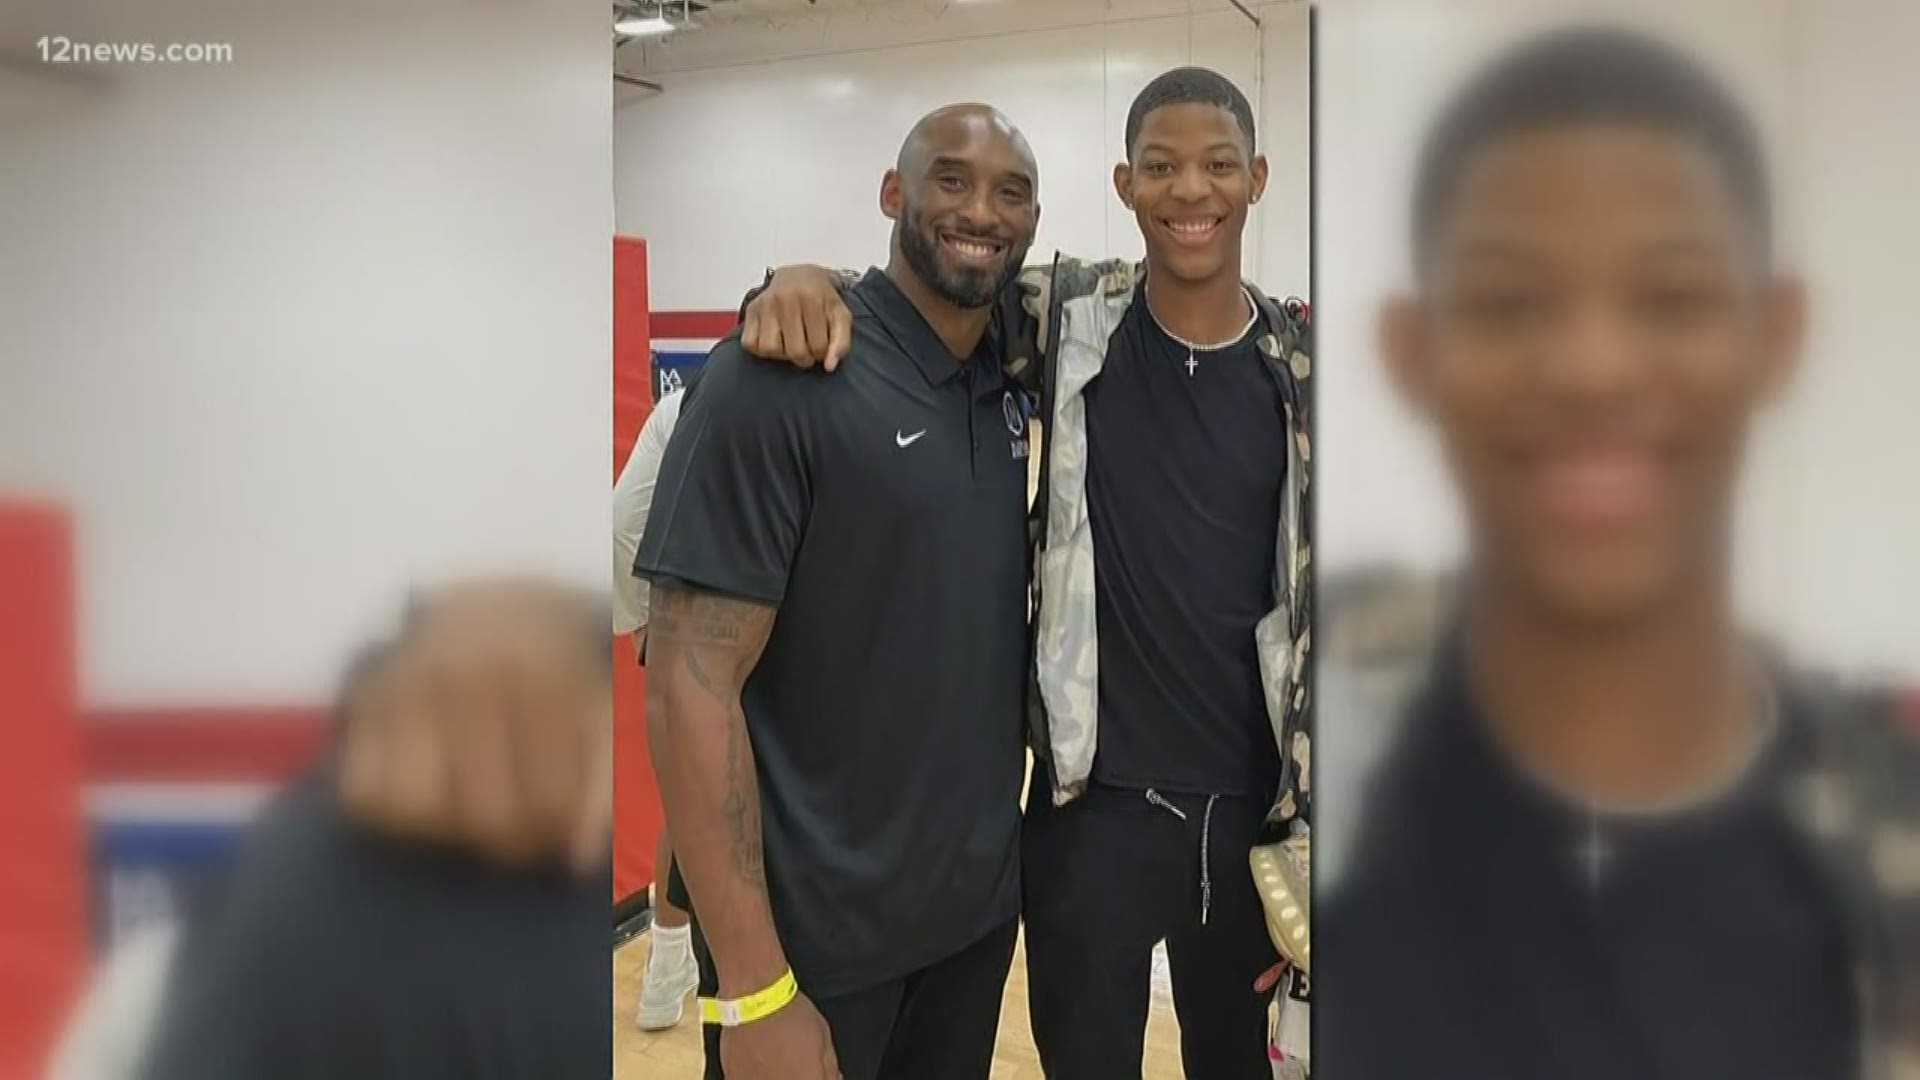 Kobe Bryant was in Gilbert in December to coach his daughter Gianna and her Mamba Sports Academy girls team.